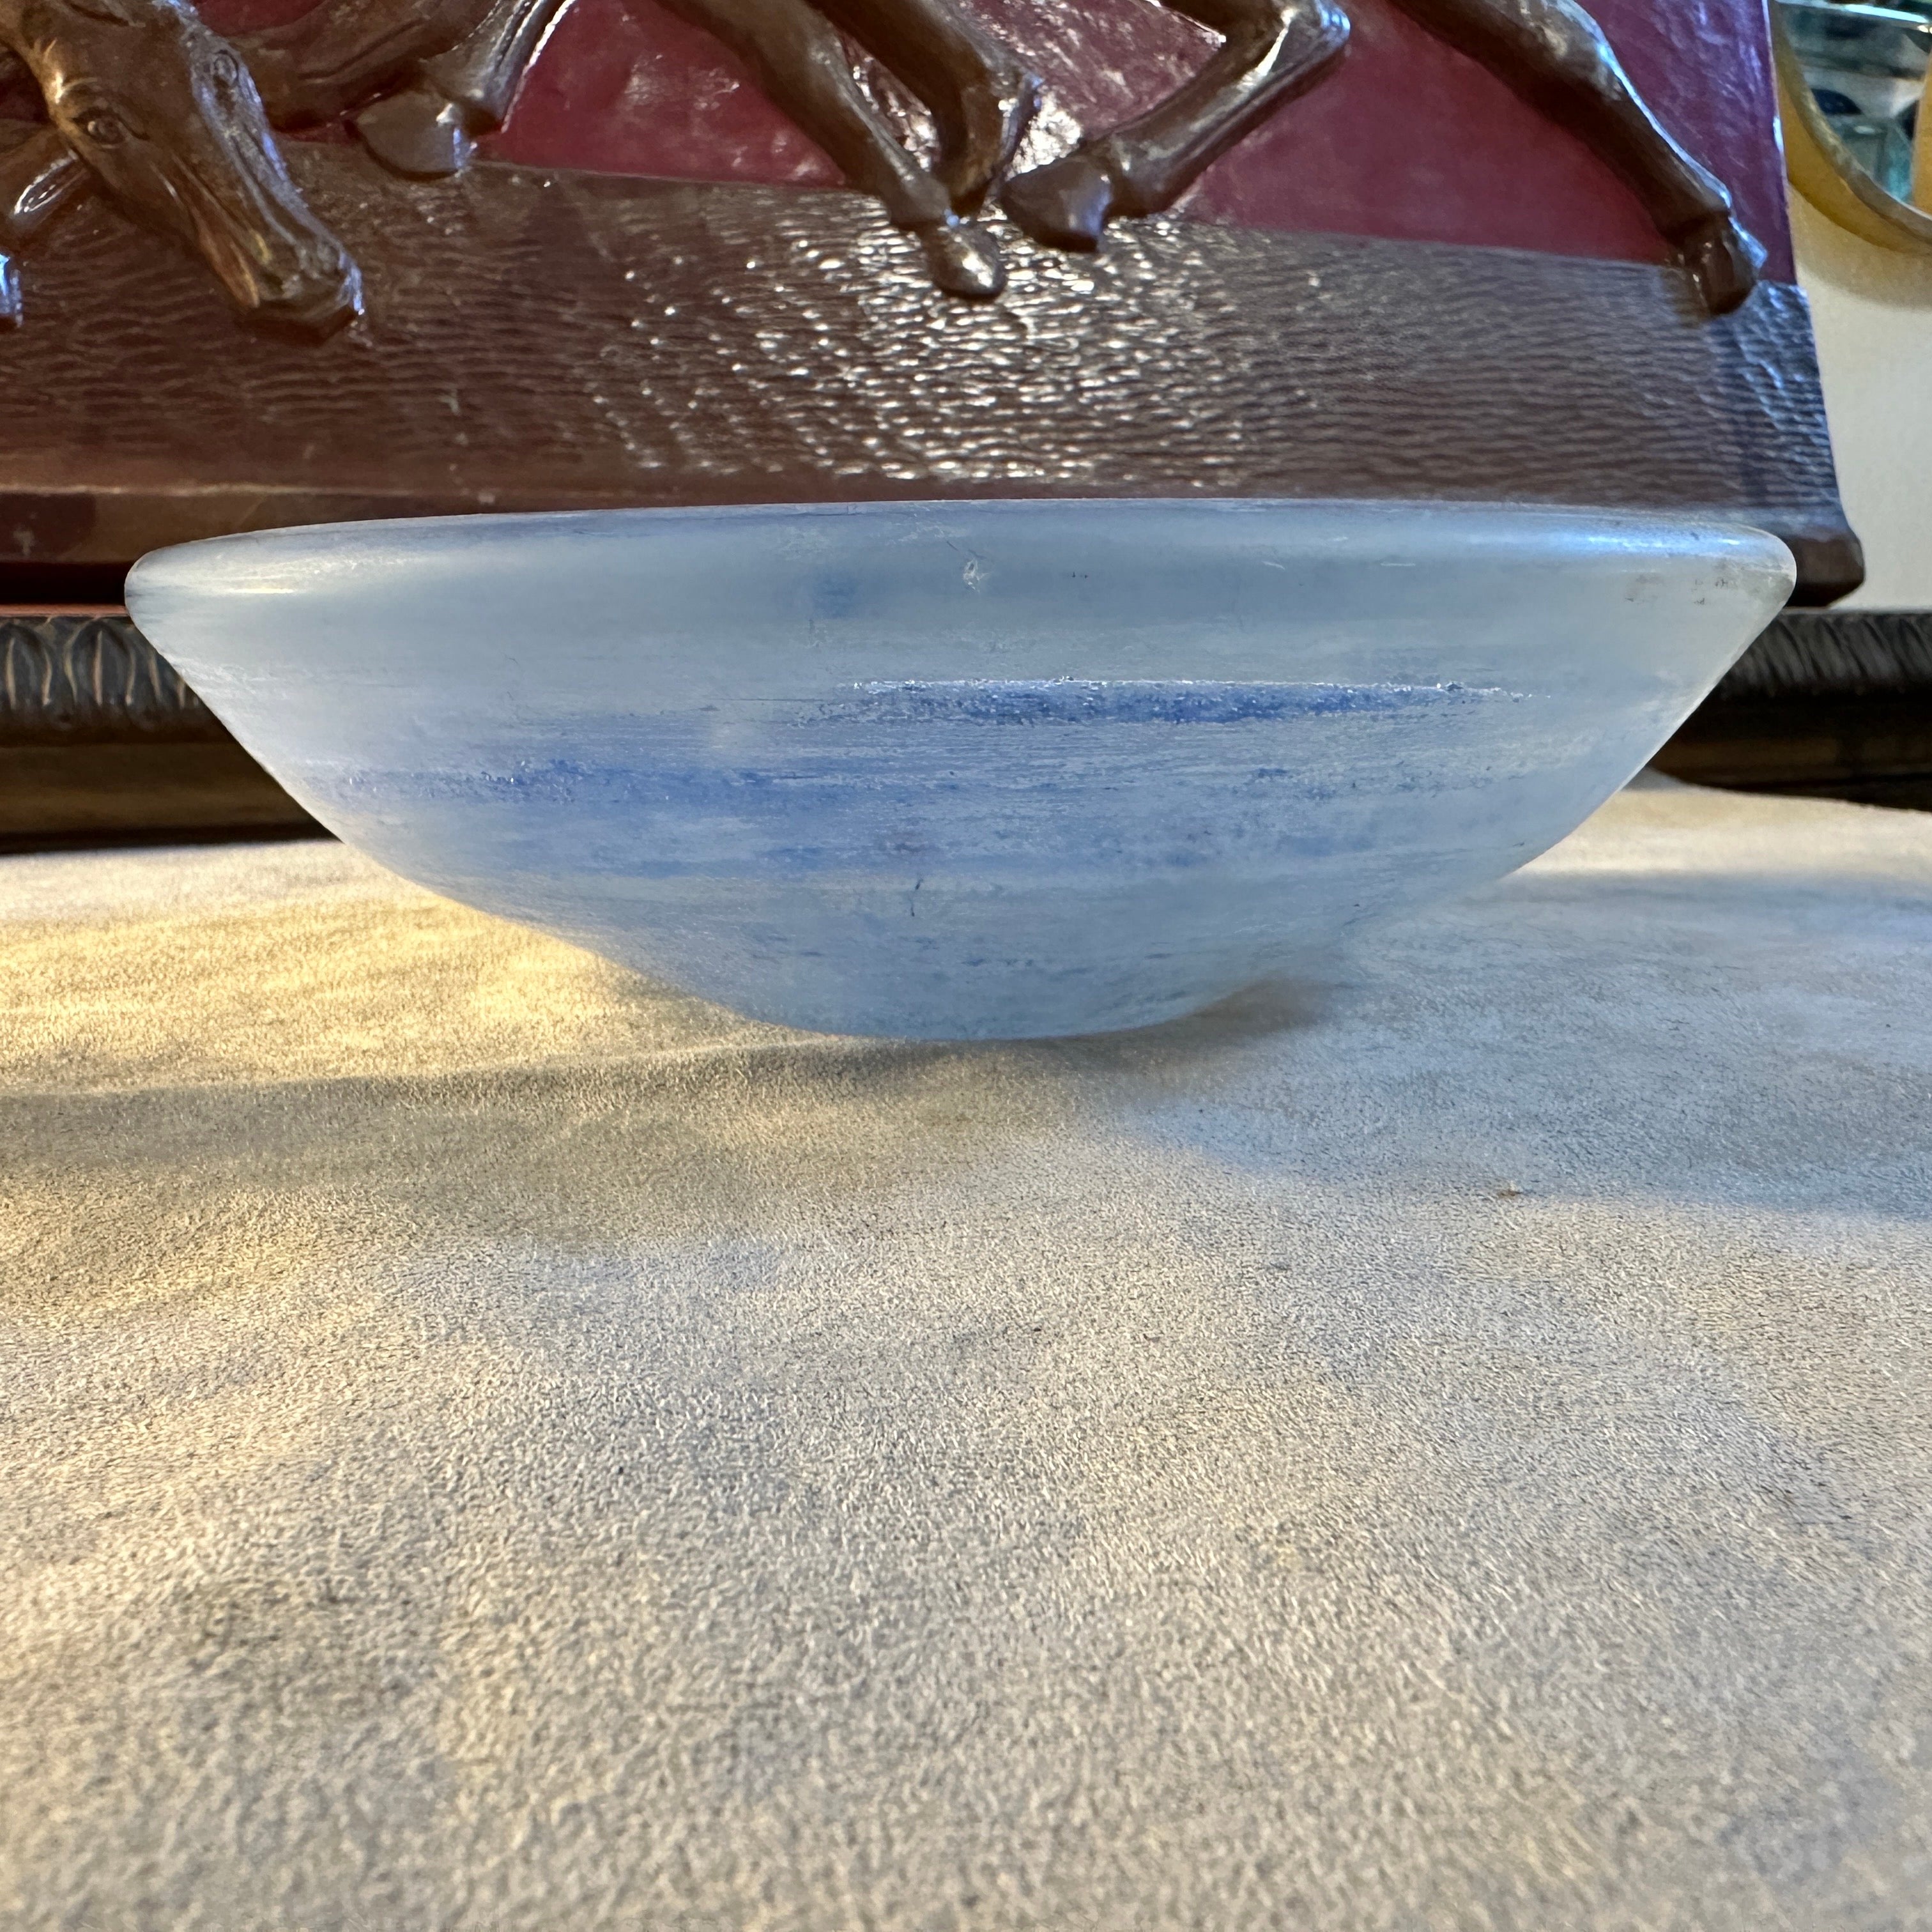 A perfect condition blue murano glass round bowl designed and manufactured in Venice in the Seventies. Crafted in the renowned Murano glassmaking tradition, this bowl is a testament to the skill and creativity of its makers. The vibrant blue hue of